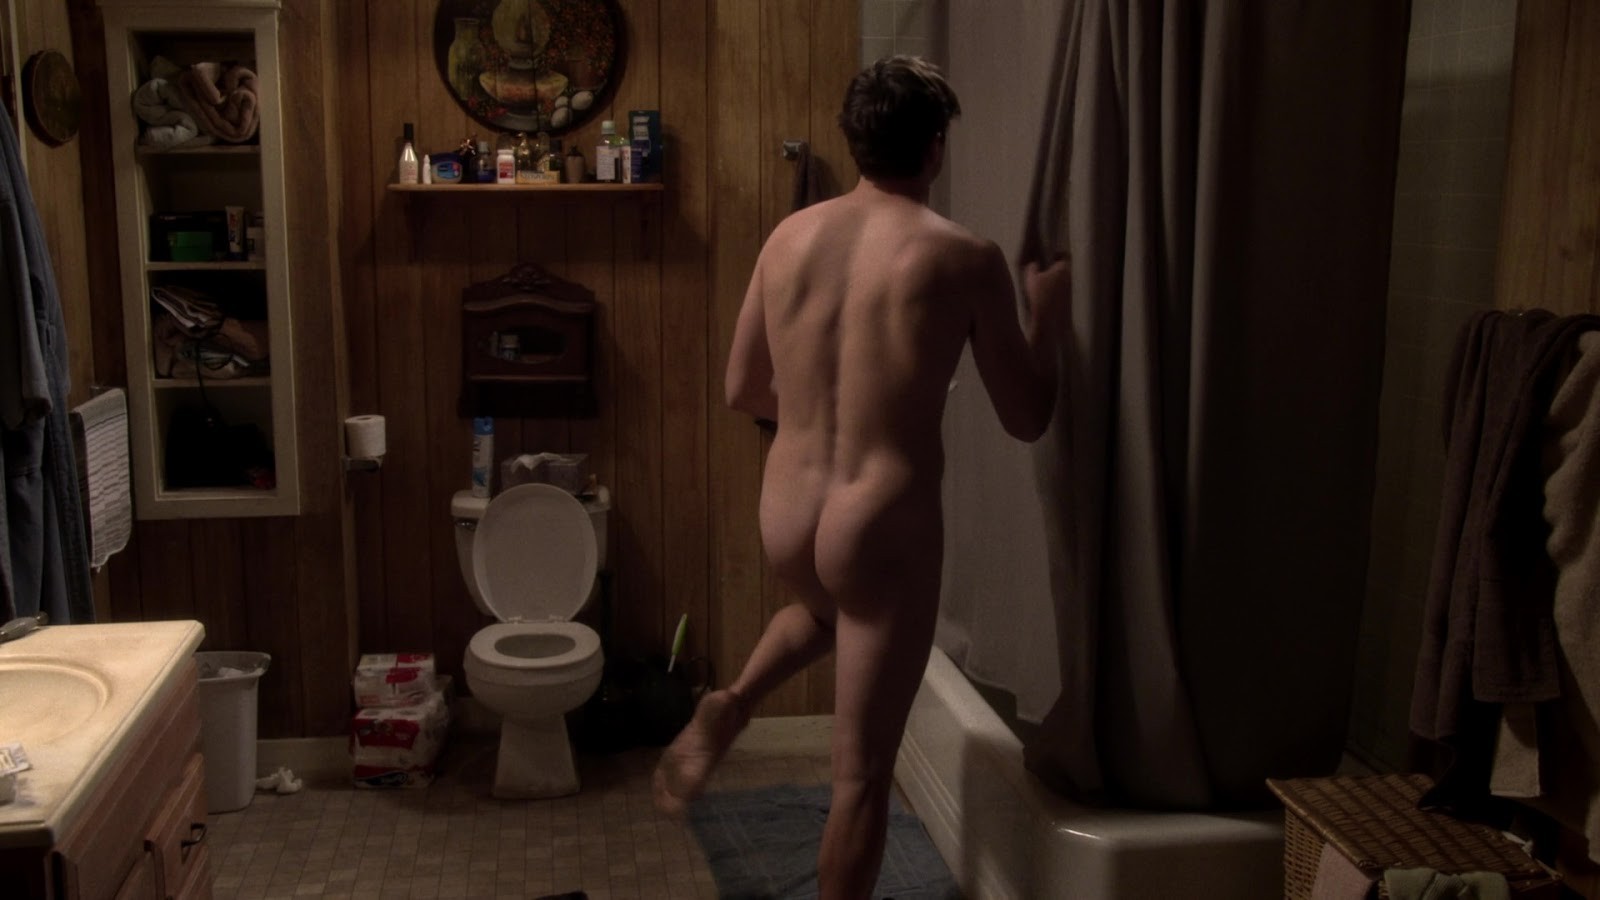 Ashton Kutcher nude in "The Ranch" (Ep. 